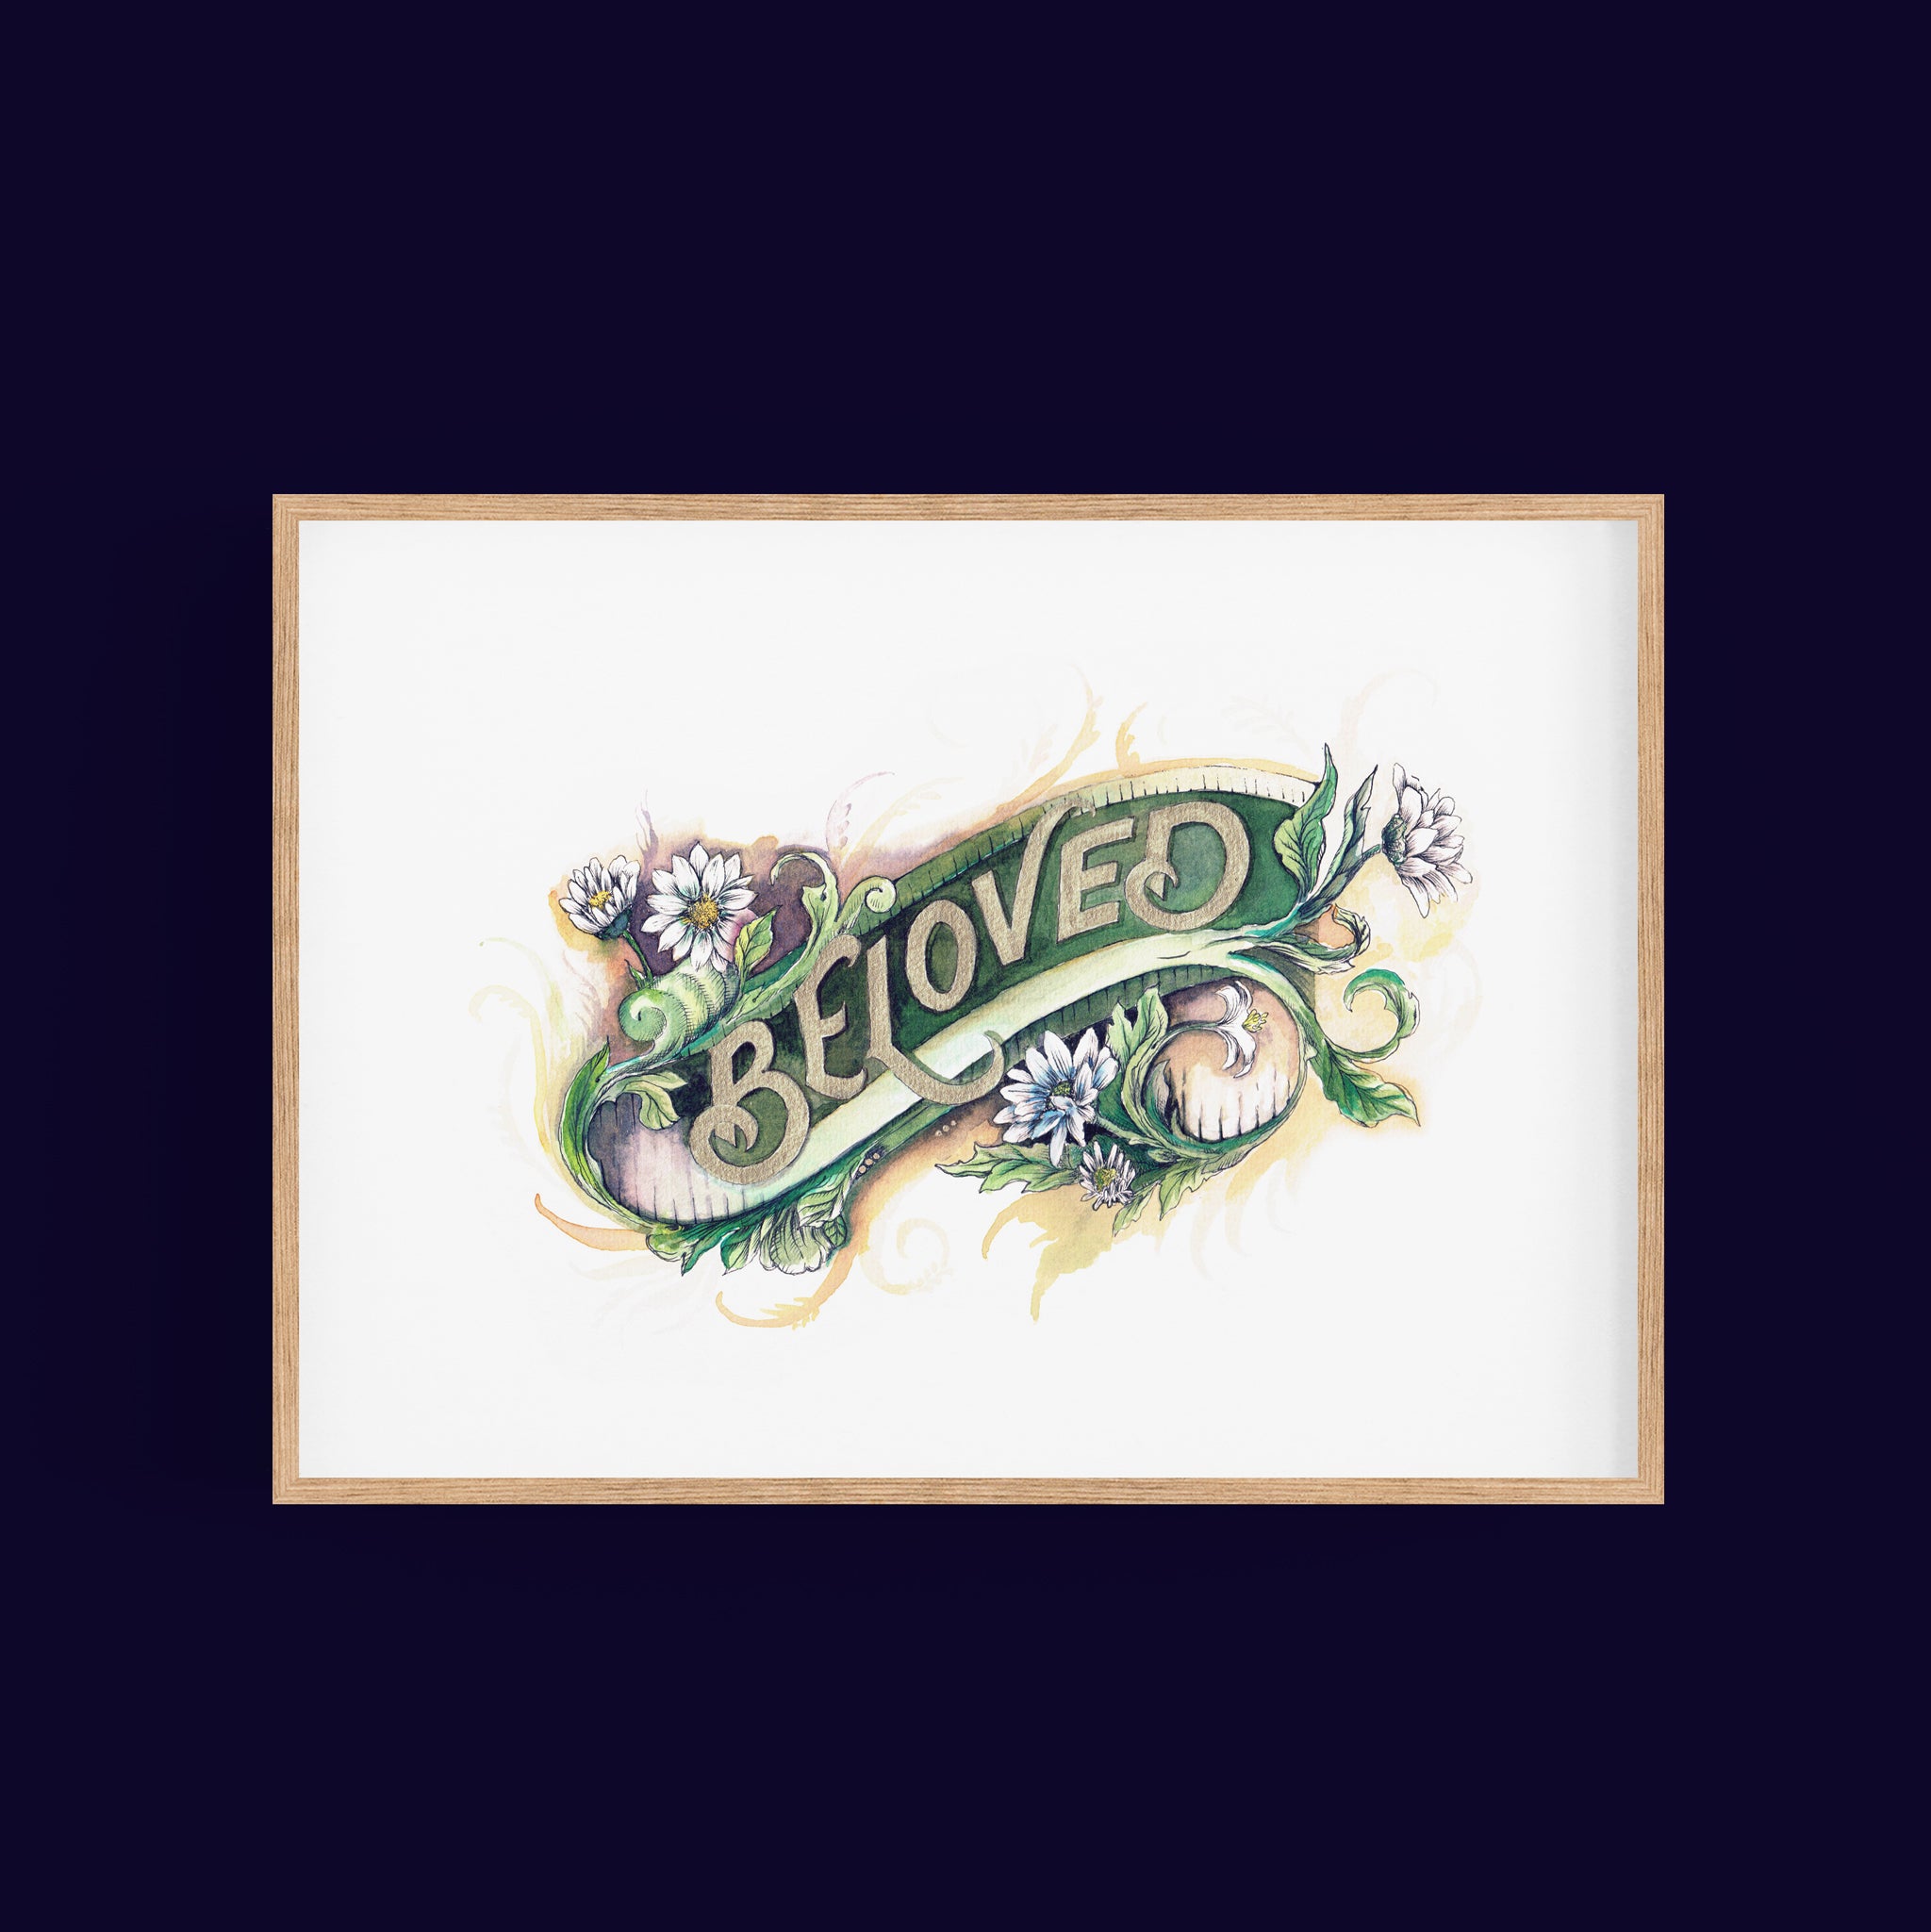 "Beloved" Colour Giclee Print with hand applied gold accent - A4 handlettering